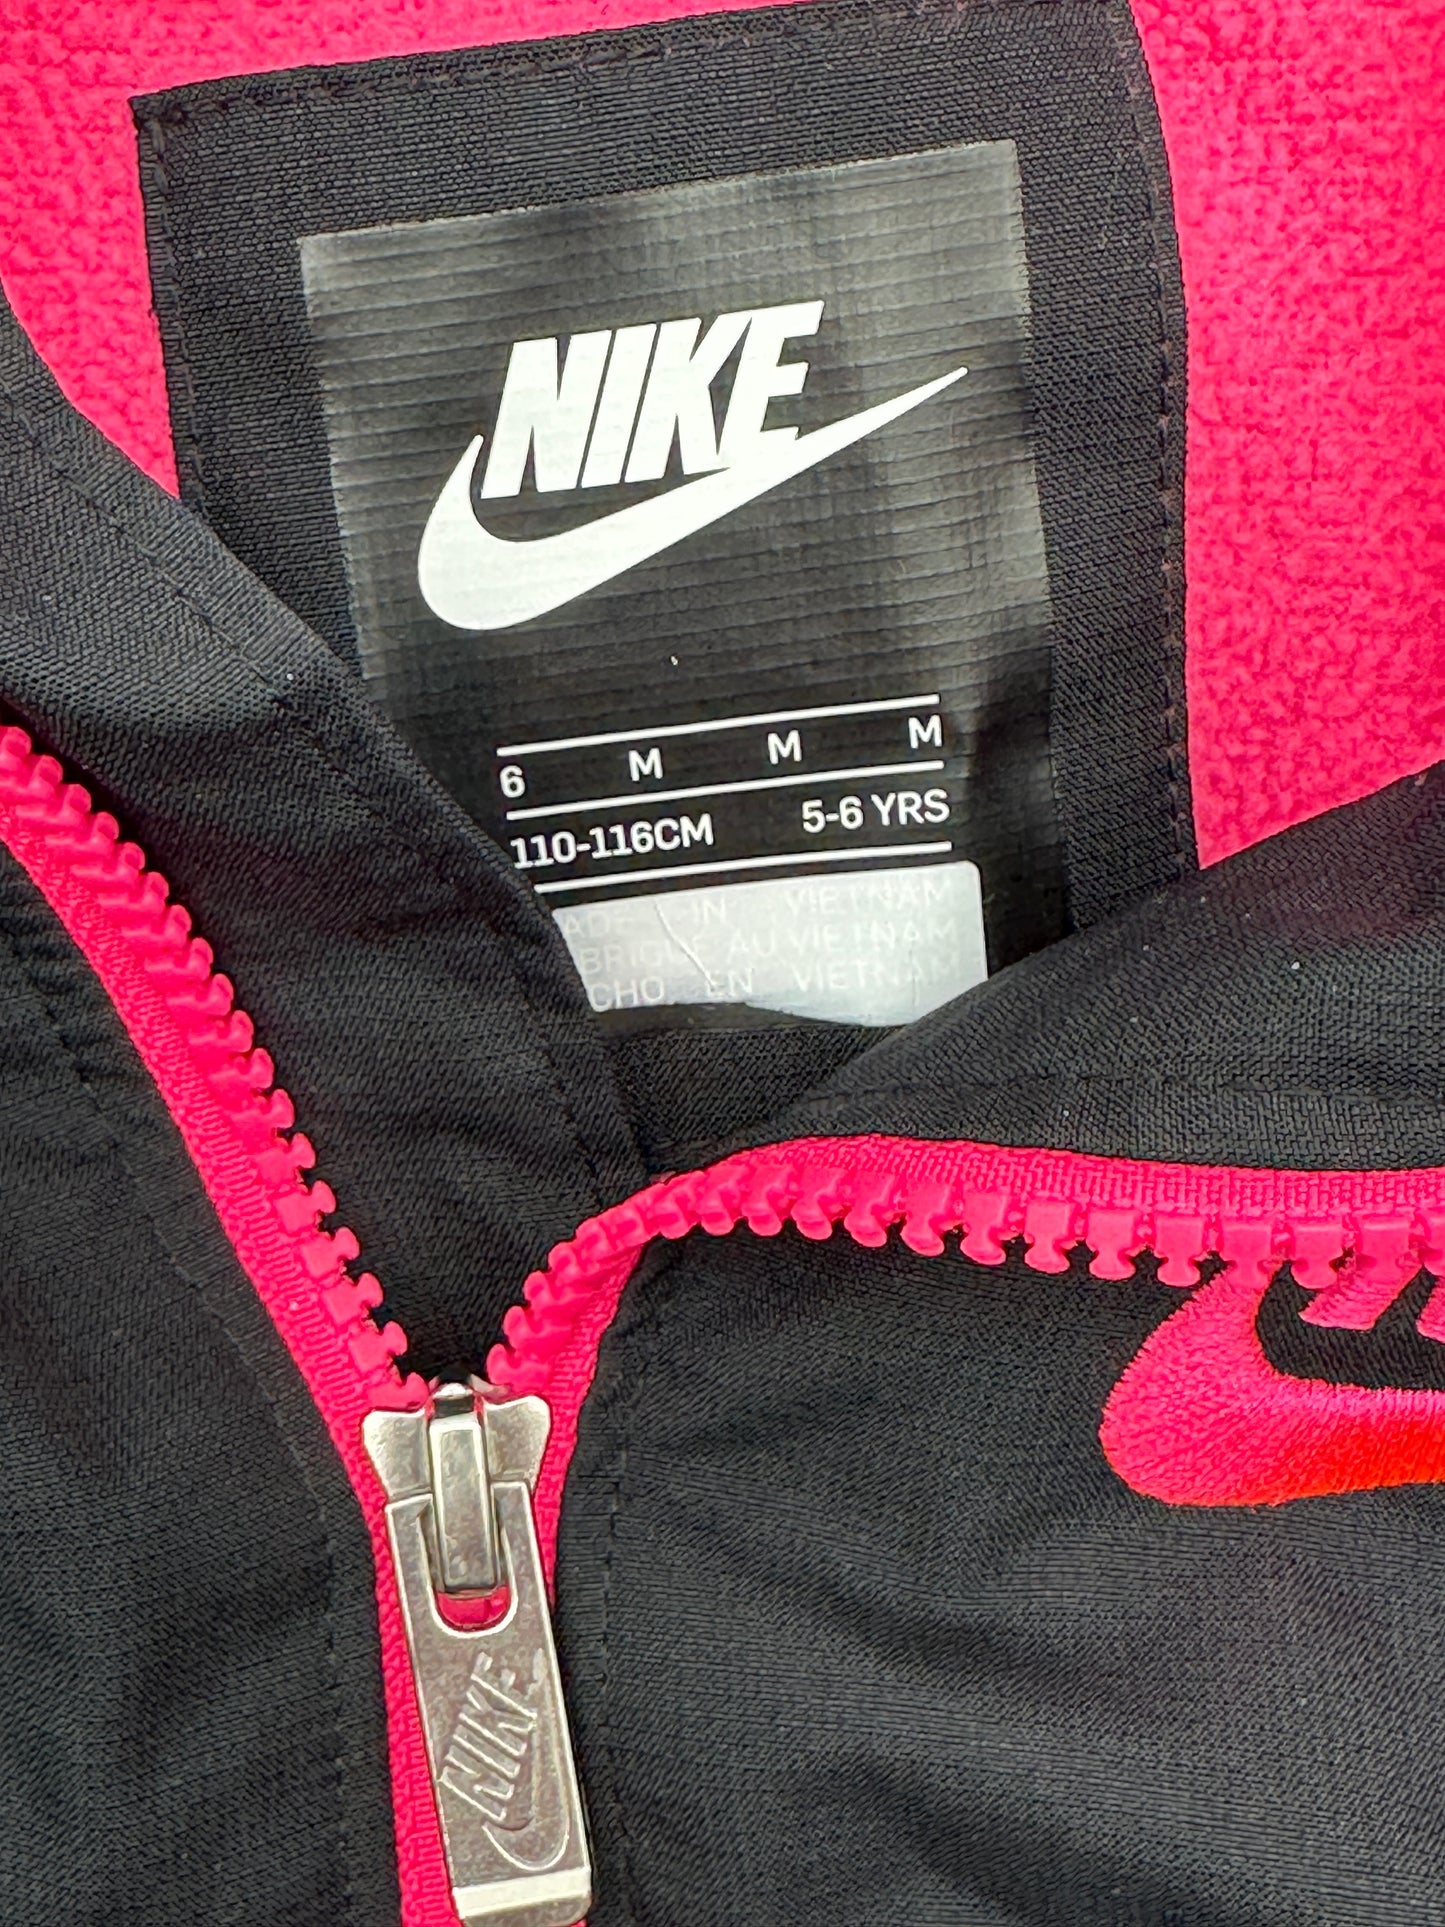 Nike Girls' Size 6 Black Soft Shell Hooded Jacket with Pink Fleece Lining